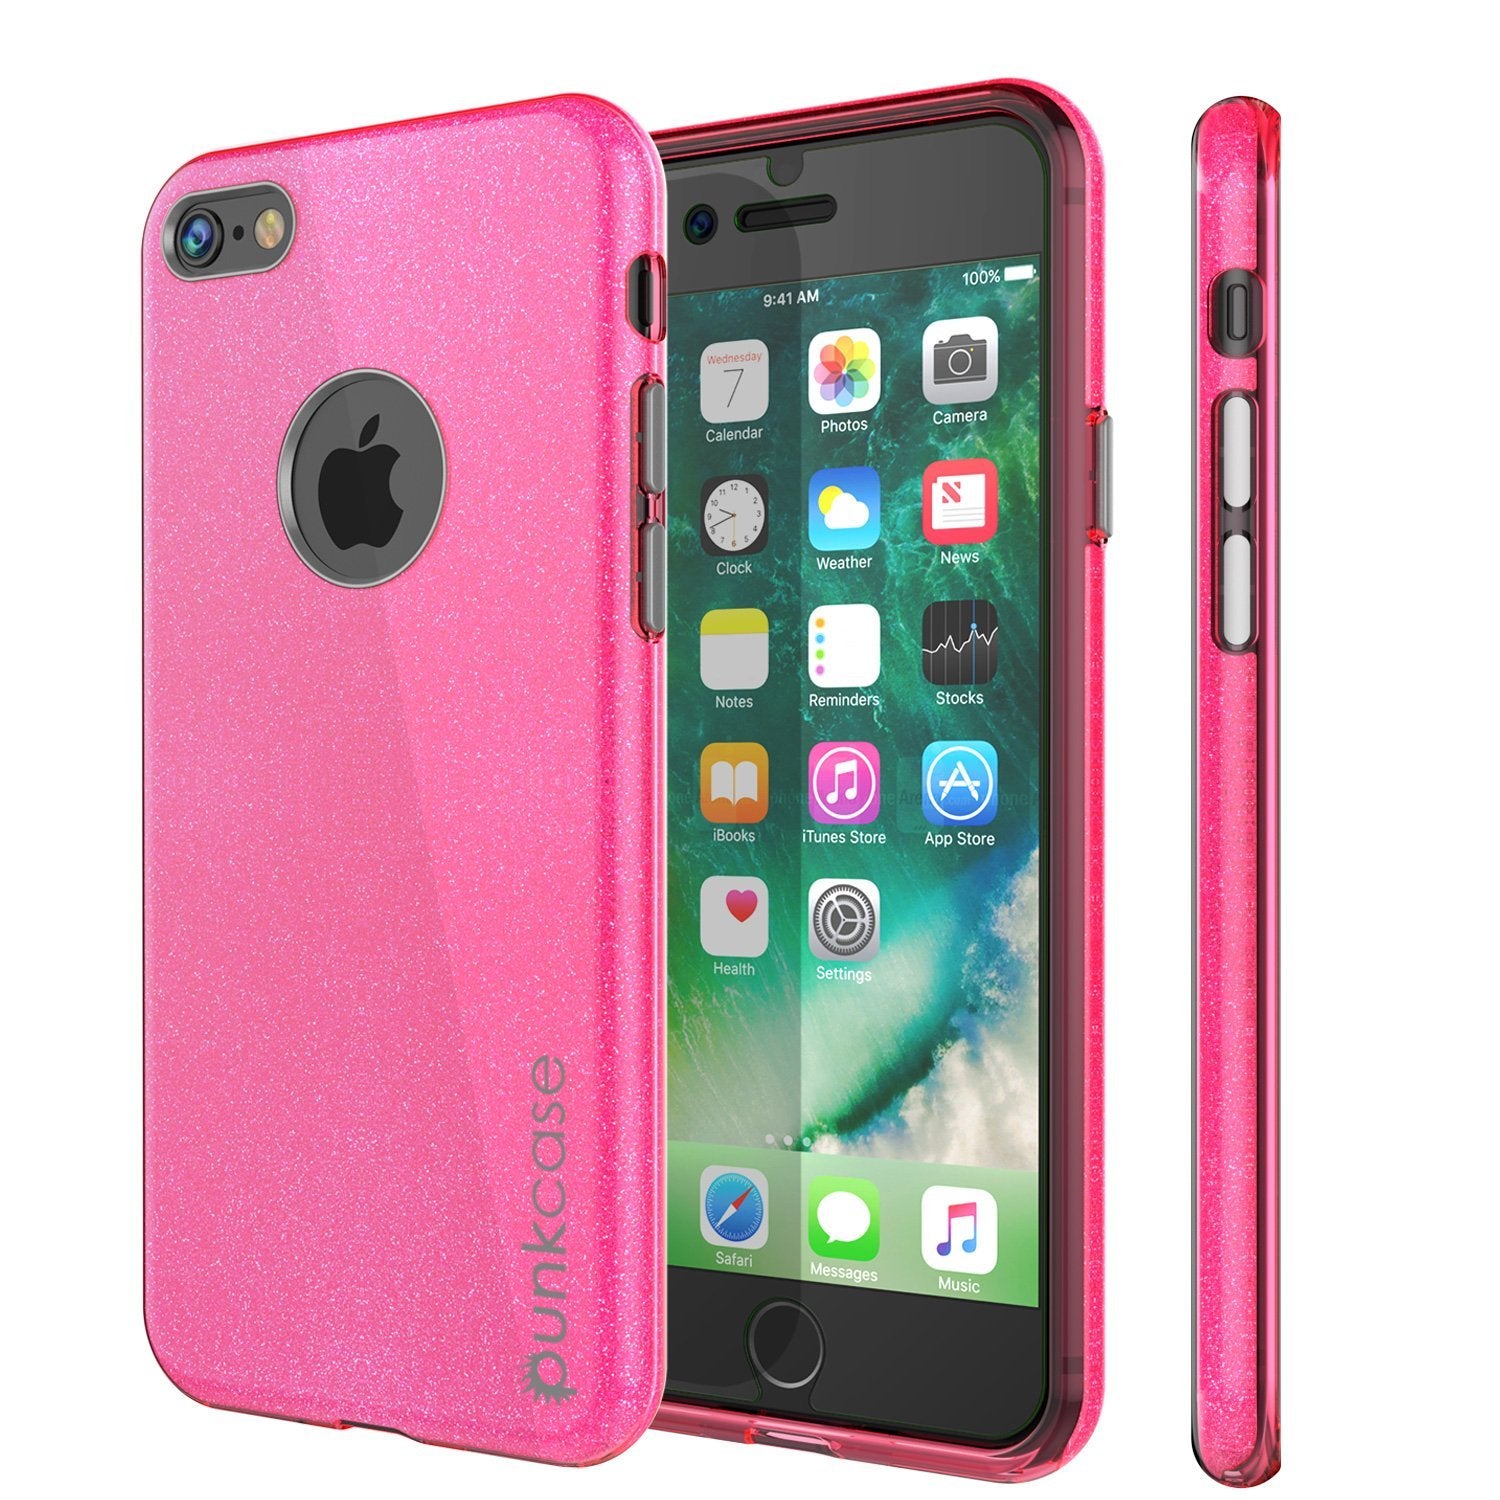 iPhone SE (4.7") Case, Punkcase Galactic 2.0 Series Ultra Slim Protective Armor TPU Cover [Pink] (Color in image: pink)